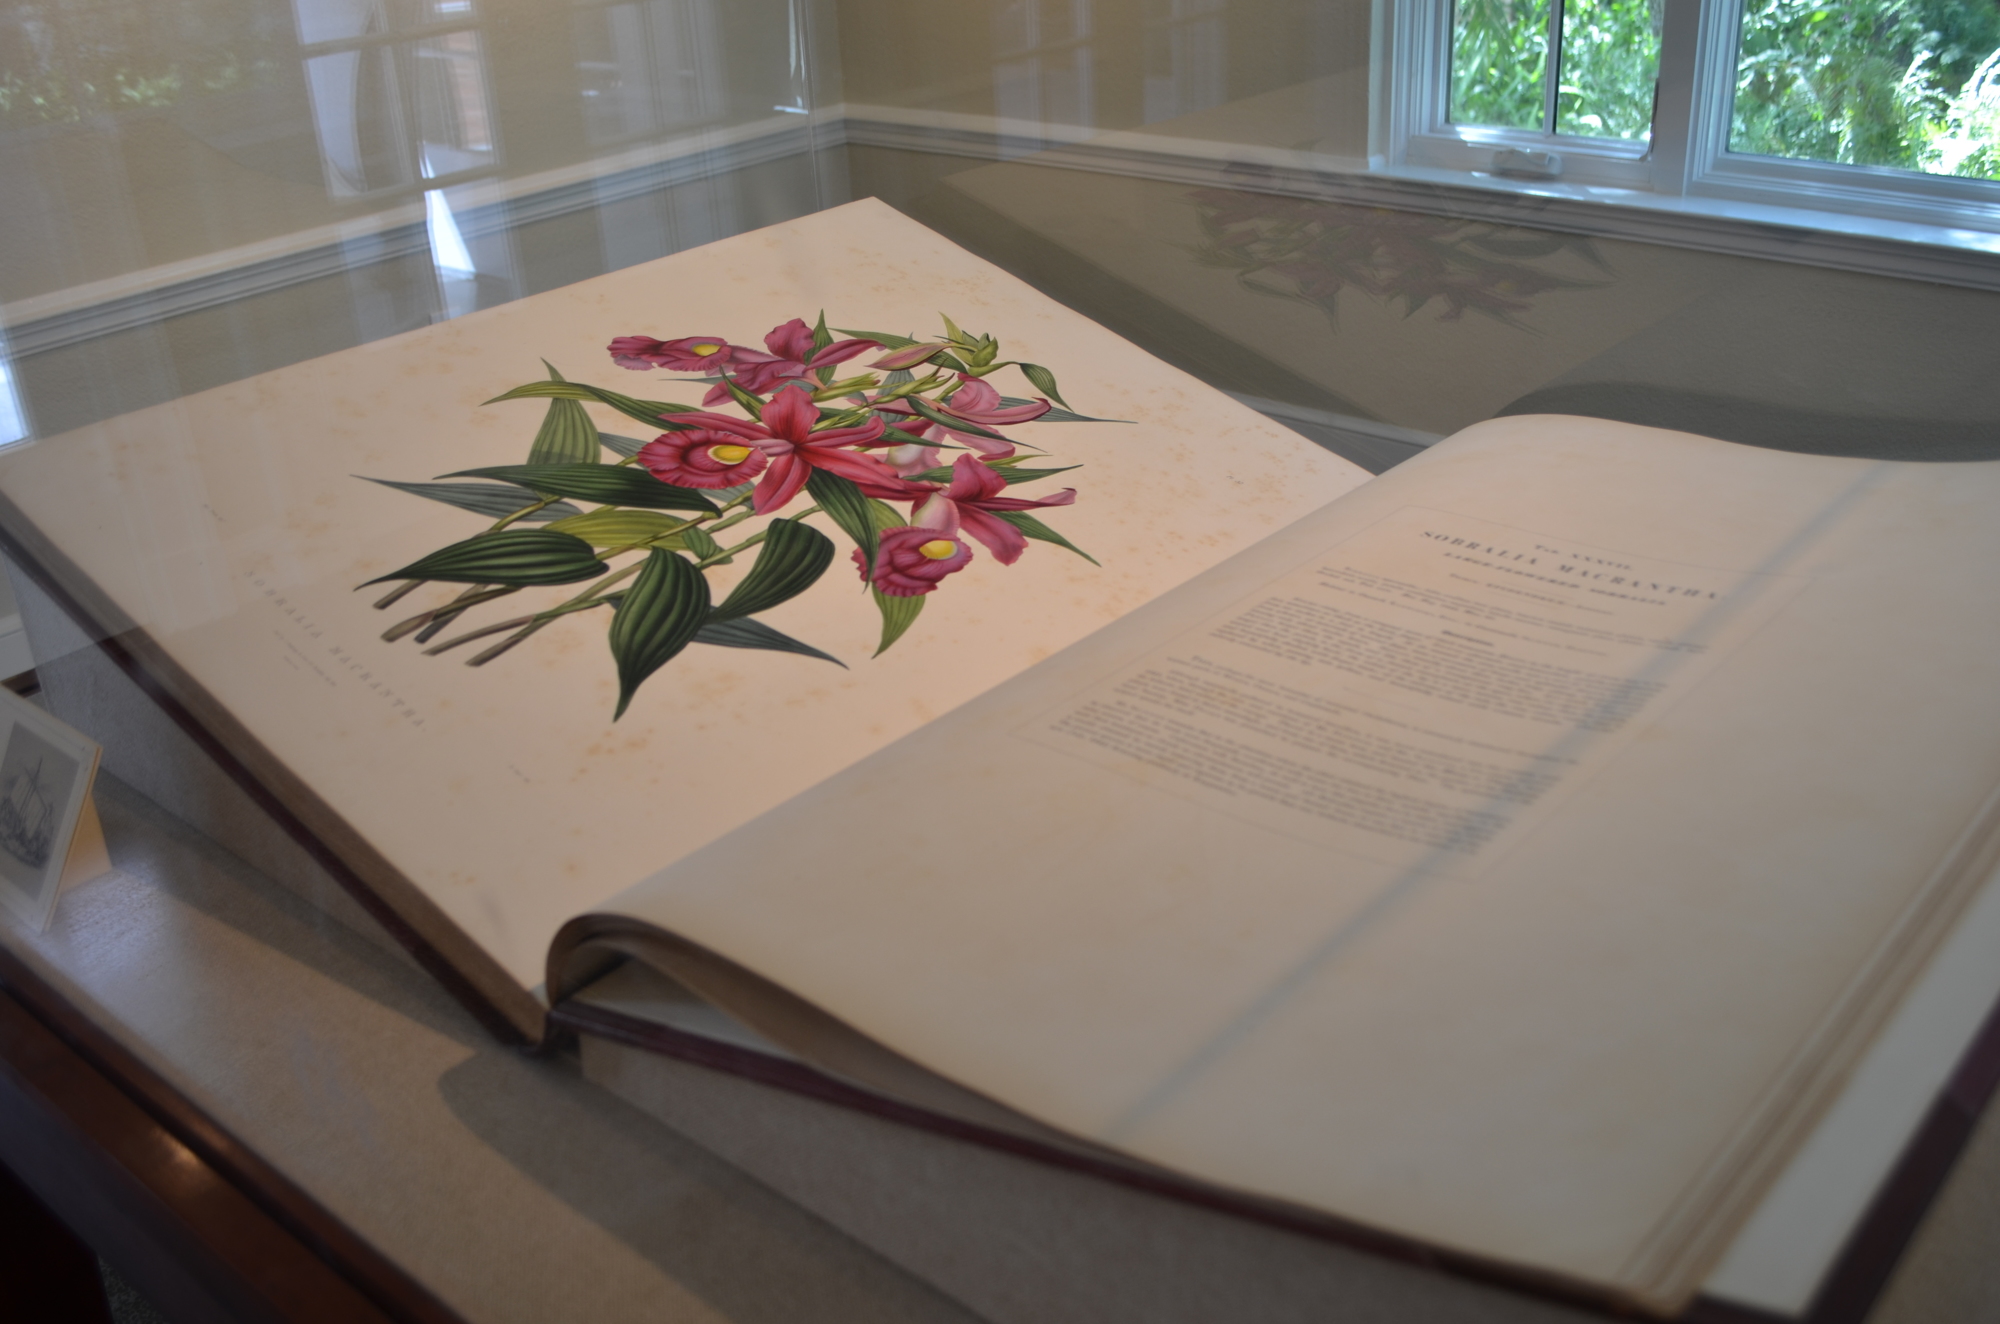 Selby’s copy of “The Orchidaceae of Mexico and Guatemala” by James Bateman — the largest and heaviest book on orchids ever to be printed — is a focal point of the botanical art section of the exhibit. Photo by Niki Kottmann.